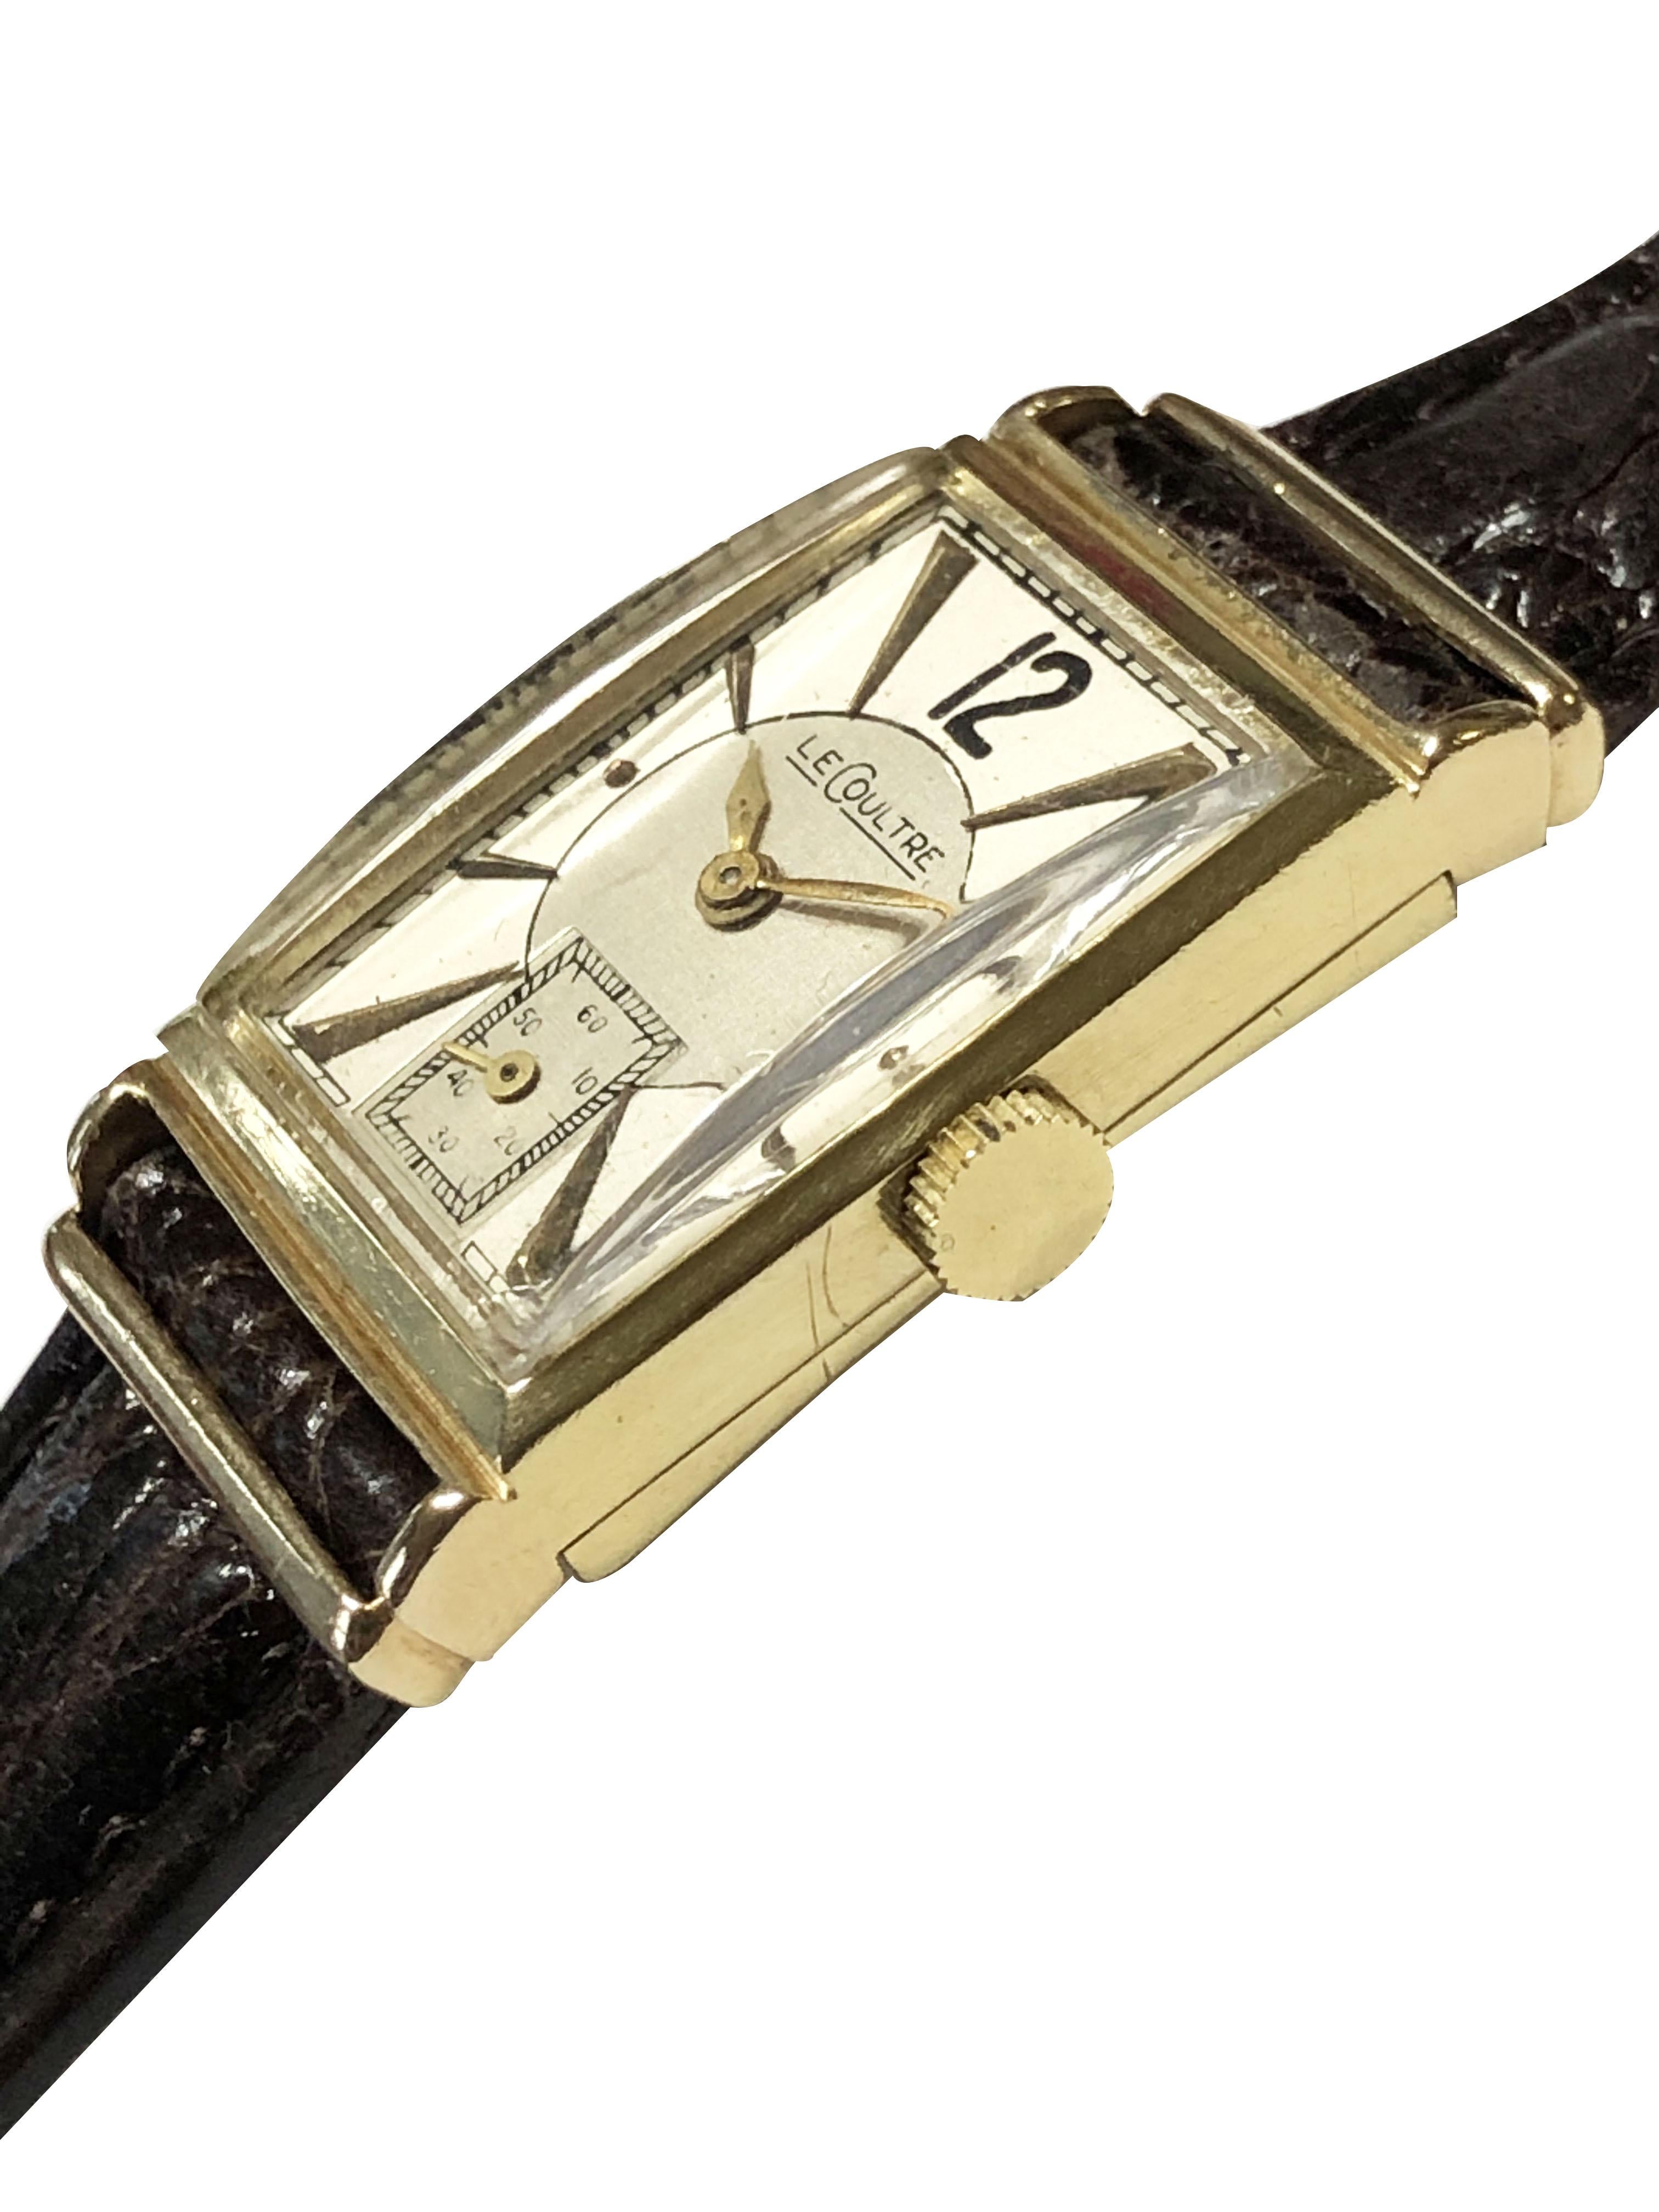 Circa 1940s LeCoultre  Art Deco Wrist Watch, 38 X 20 M.M. 14K Yellow Gold 2 Piece Rectangular case, 17 Jewel Mechanical, manual wind nickle lever movement. Silver Satin two tone dial with raised Gold markers and a sub seconds chapter. New Brown